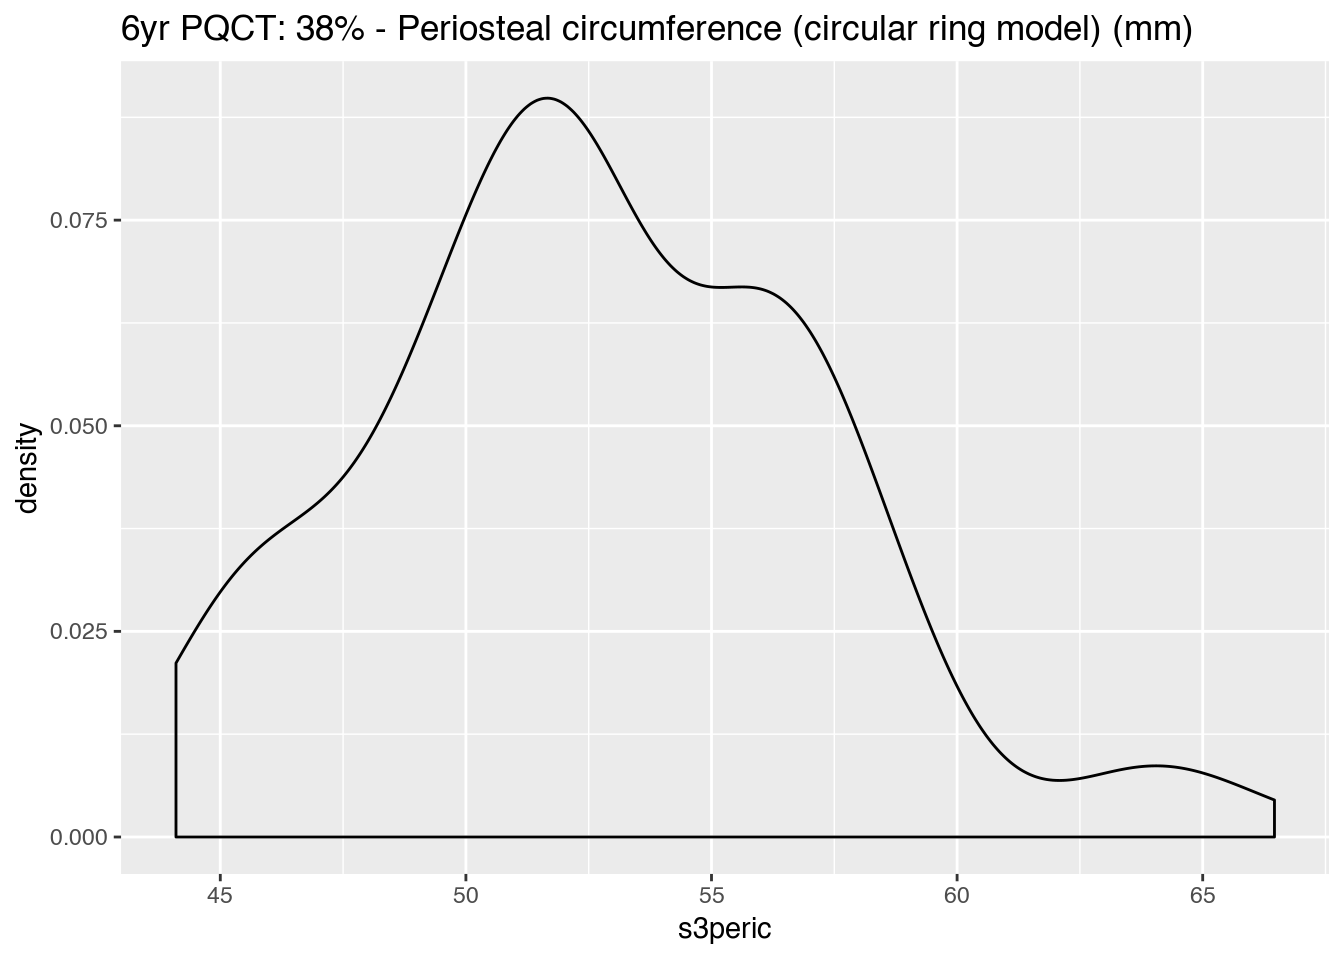 Distribution of periosteal circumference at 38% from the distal end of the tibia (mm) at 6 years of age (s3peric), adjusted for sex and age, as measured by PQCT (n = 141).